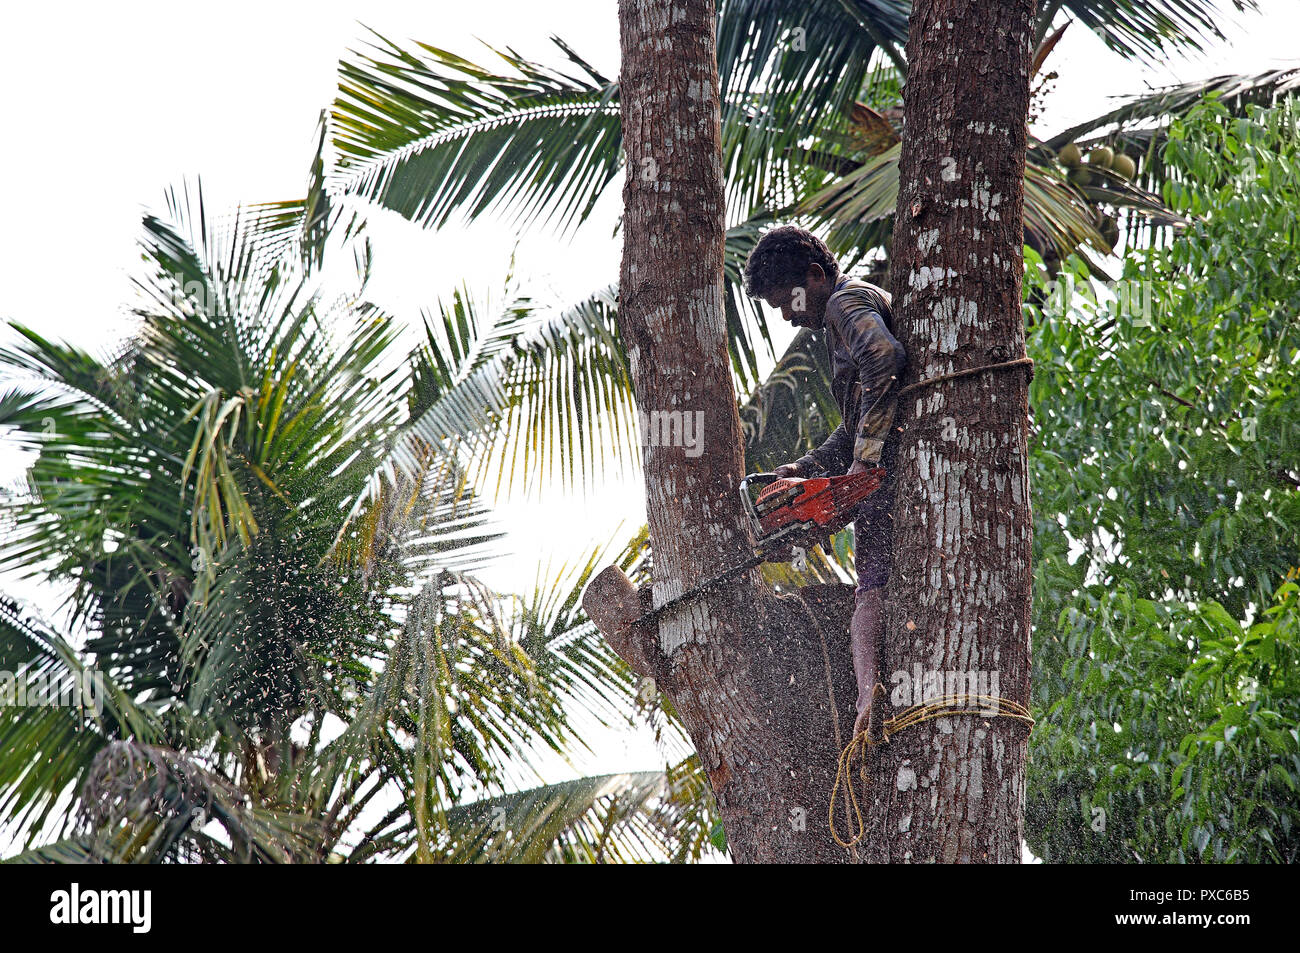 Keerampara, Kerala, India - March 22, 2018: Tree cutter riskily perched on tree top and cutting down large branch of tree with handheld chainsaw Stock Photo